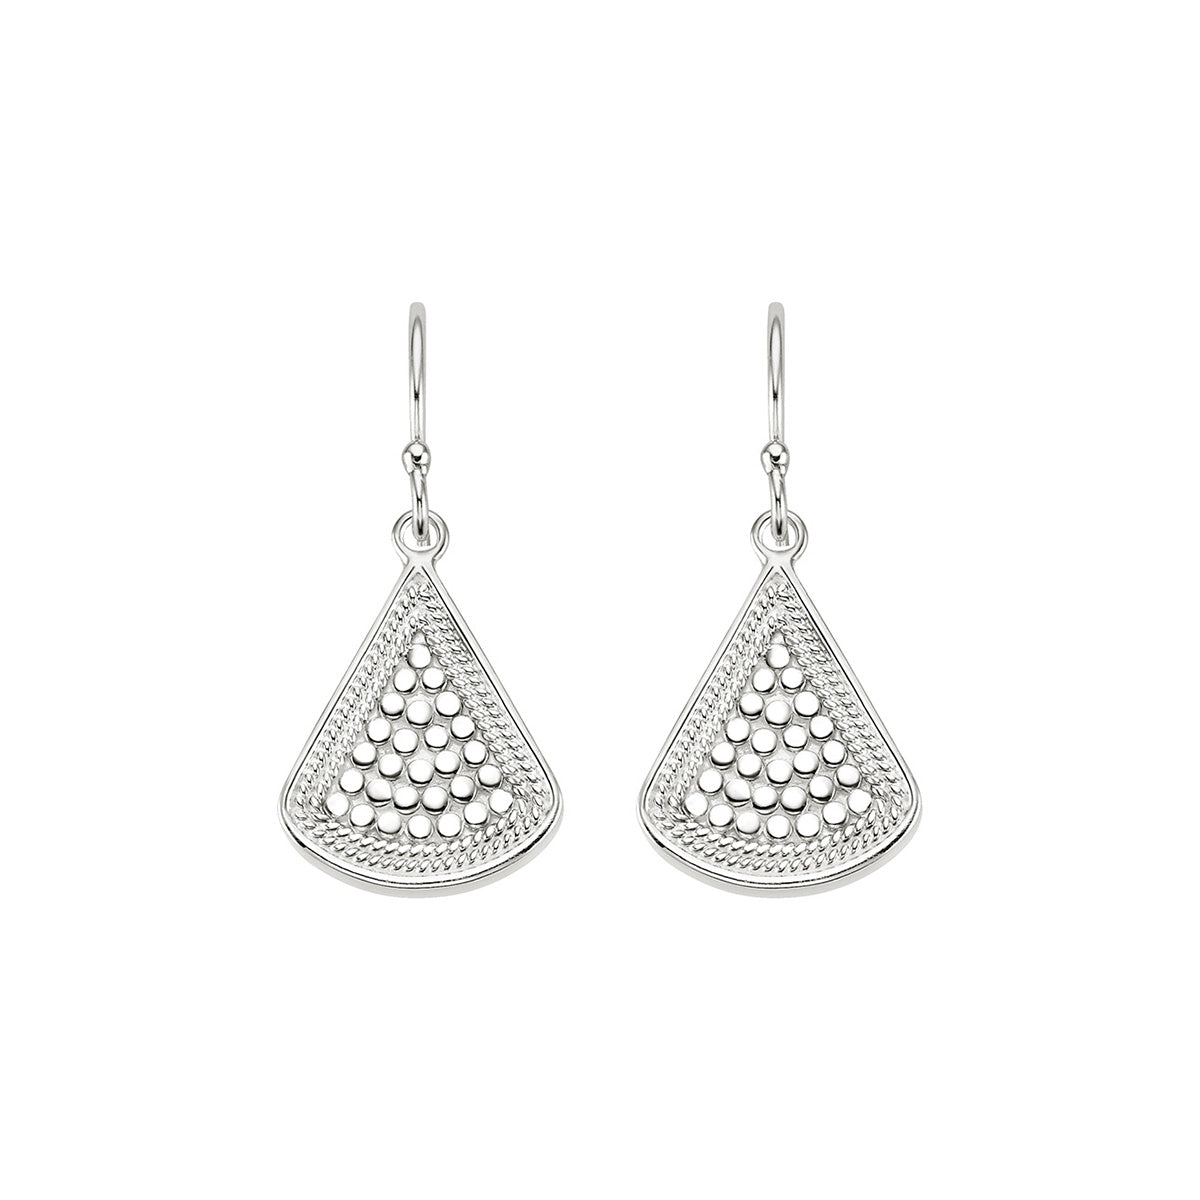 Ana Beck Sterling Silver Triangle Drop Earrings - Silver